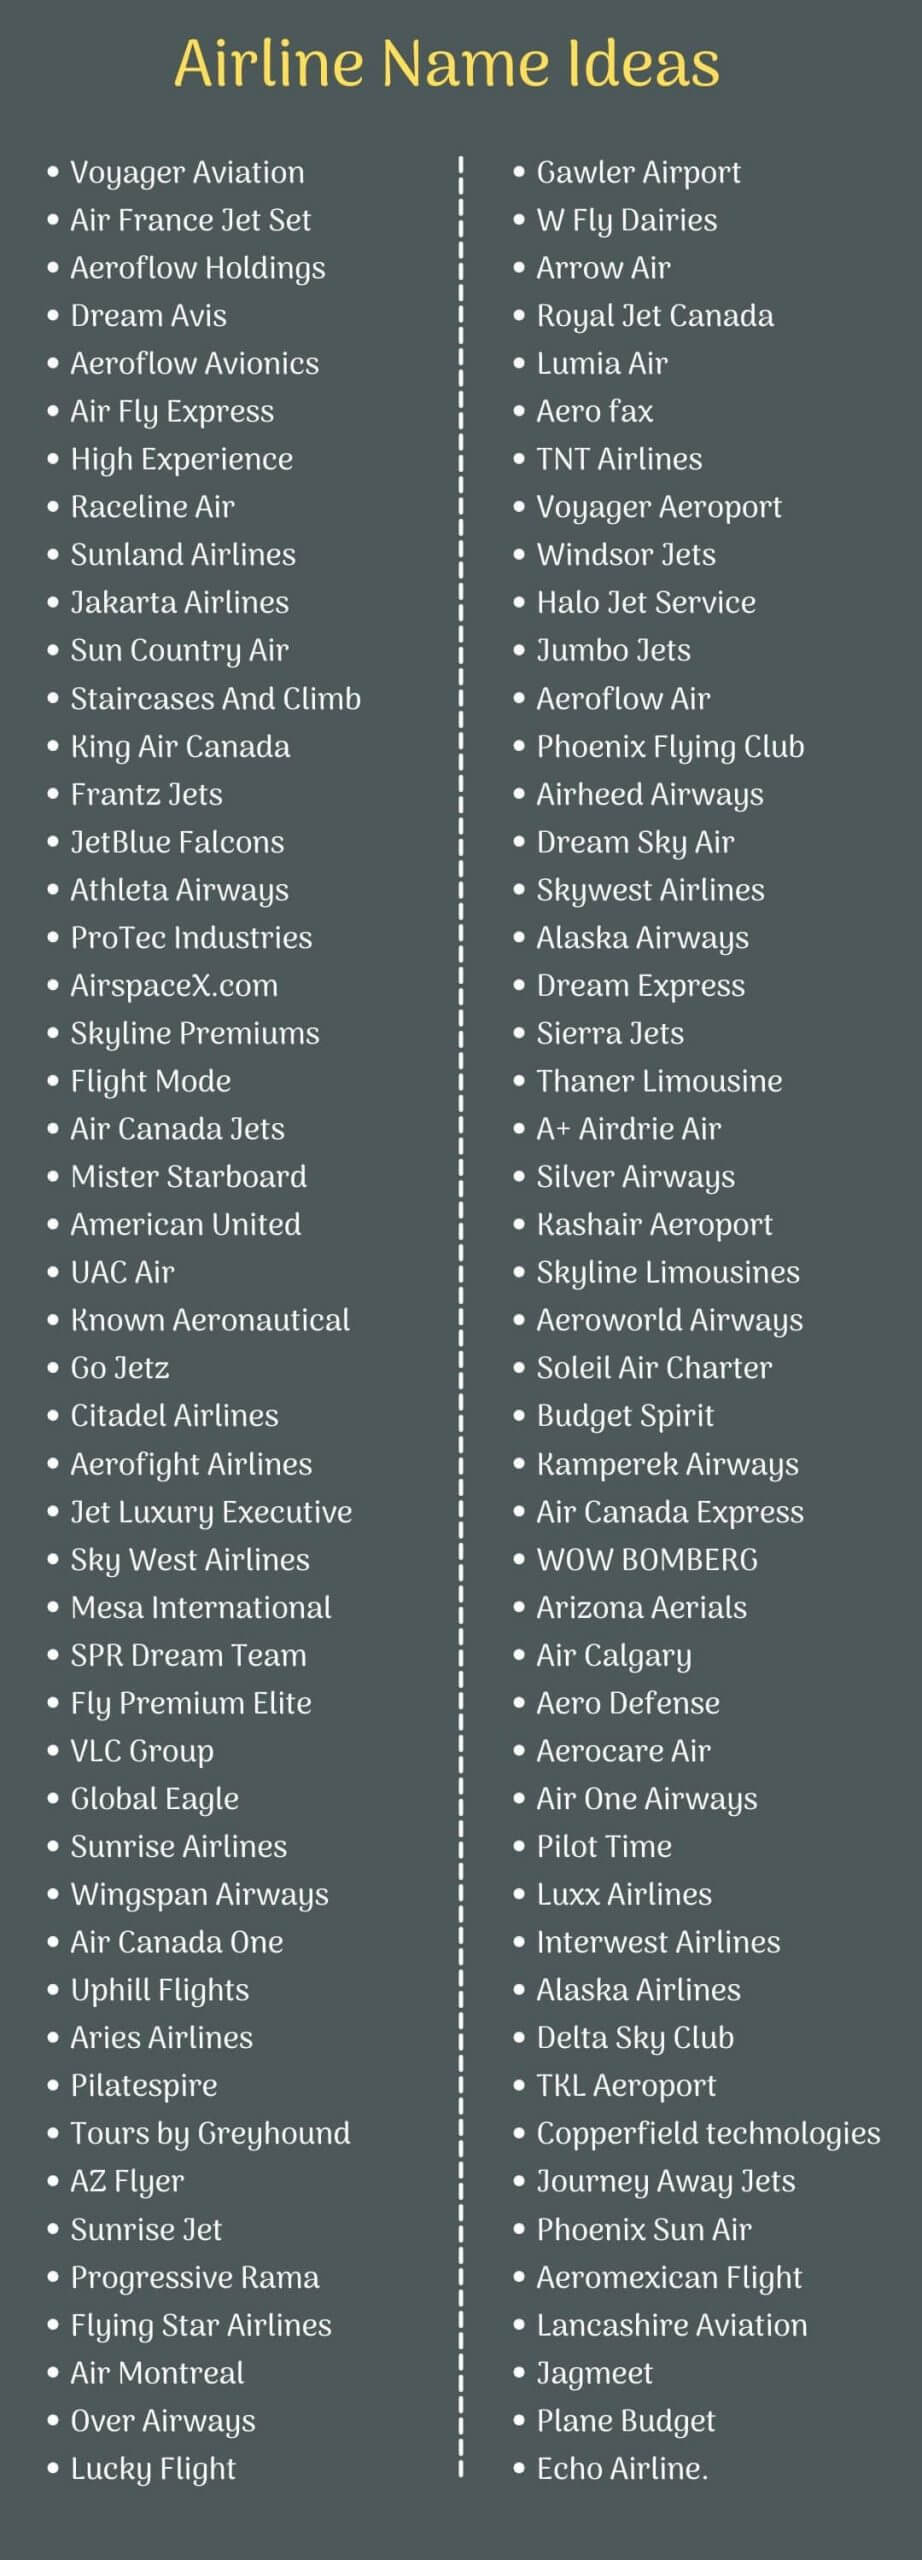 Airline Name Ideas